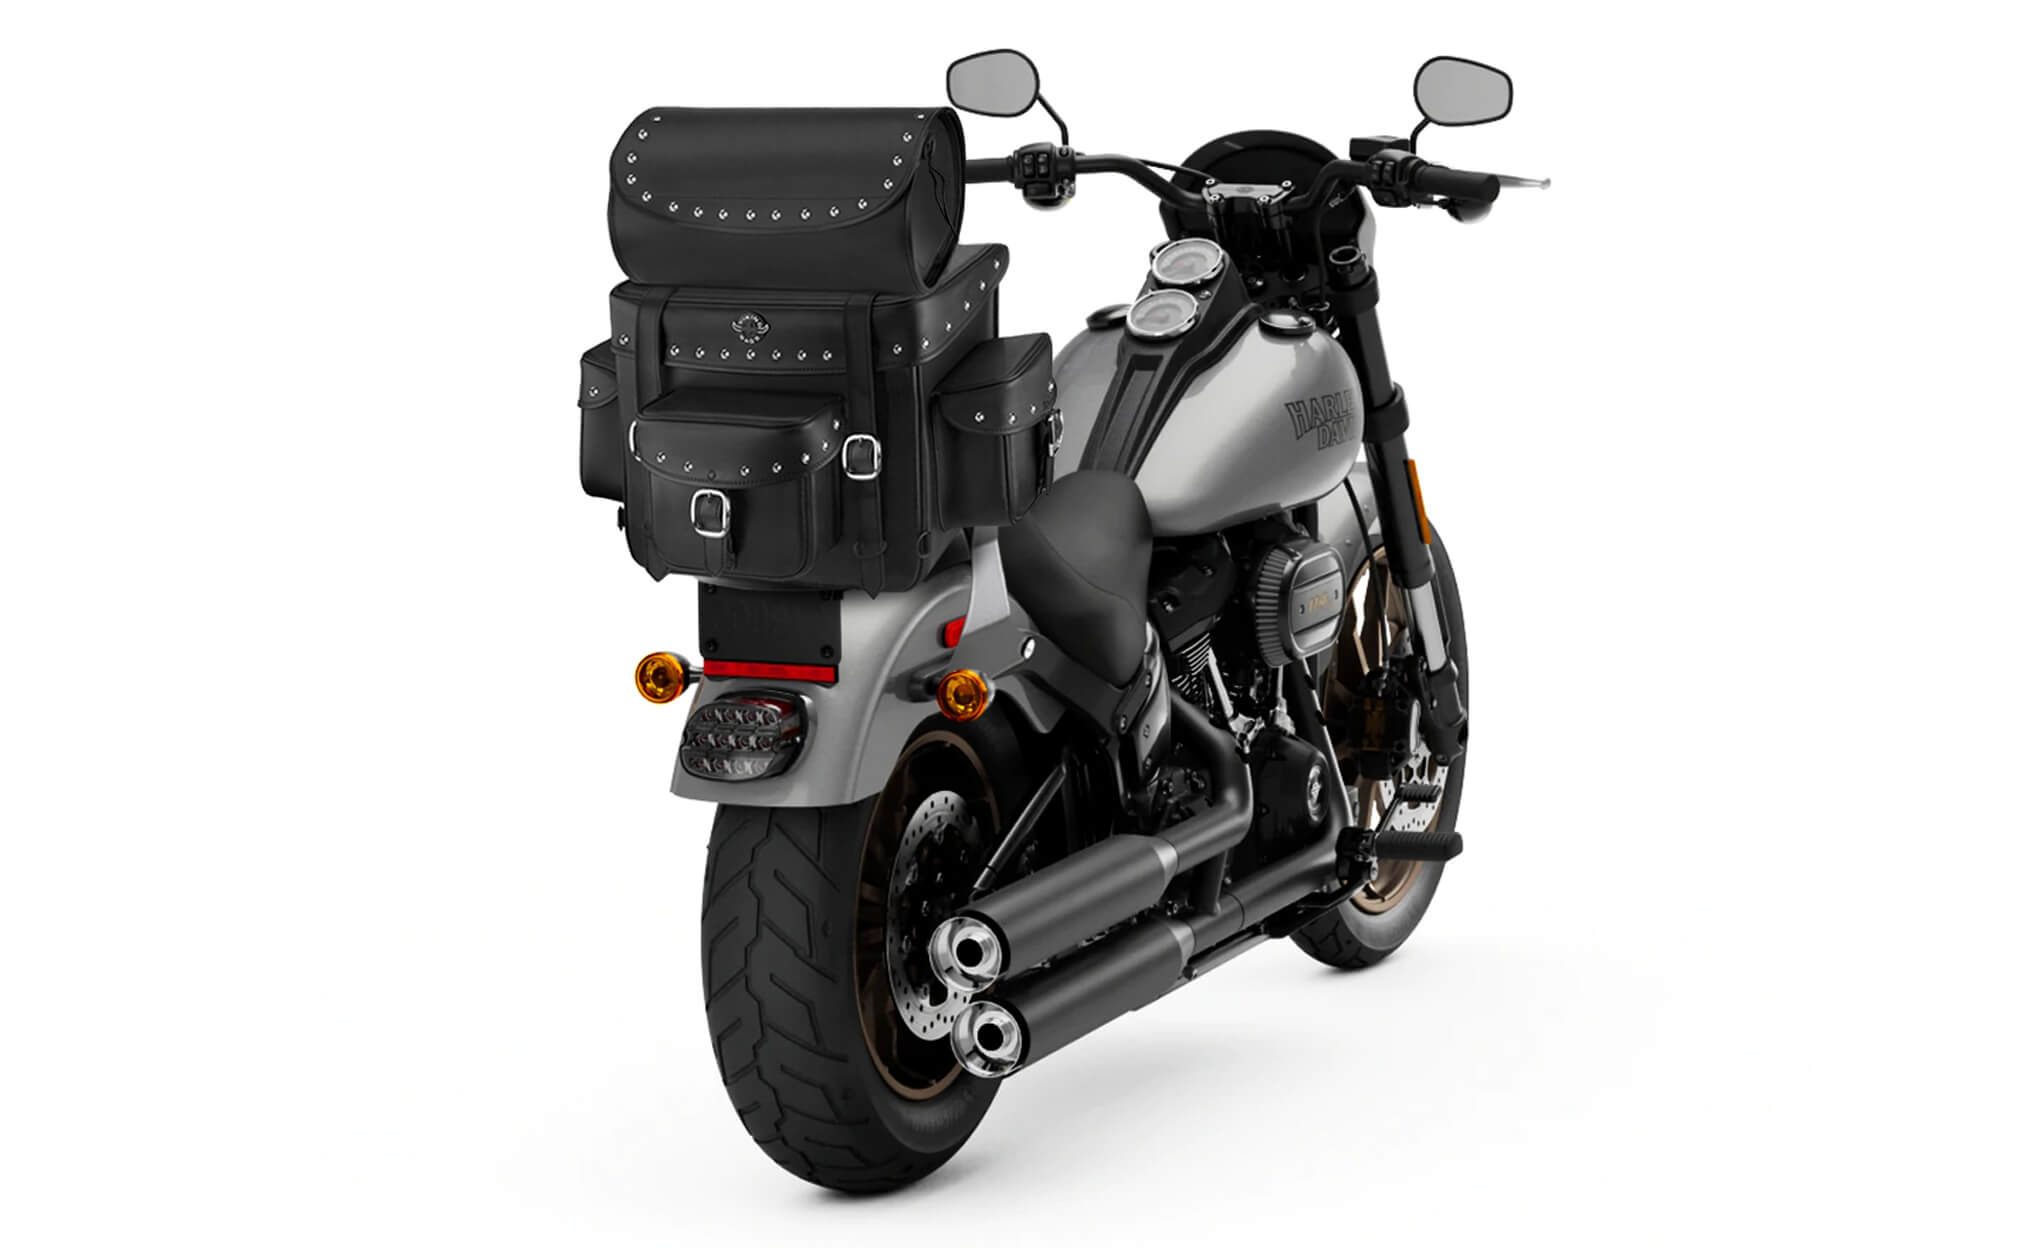 Viking Revival Series Large Victory Studded Motorcycle Tail Bag Bag on Bike View @expand